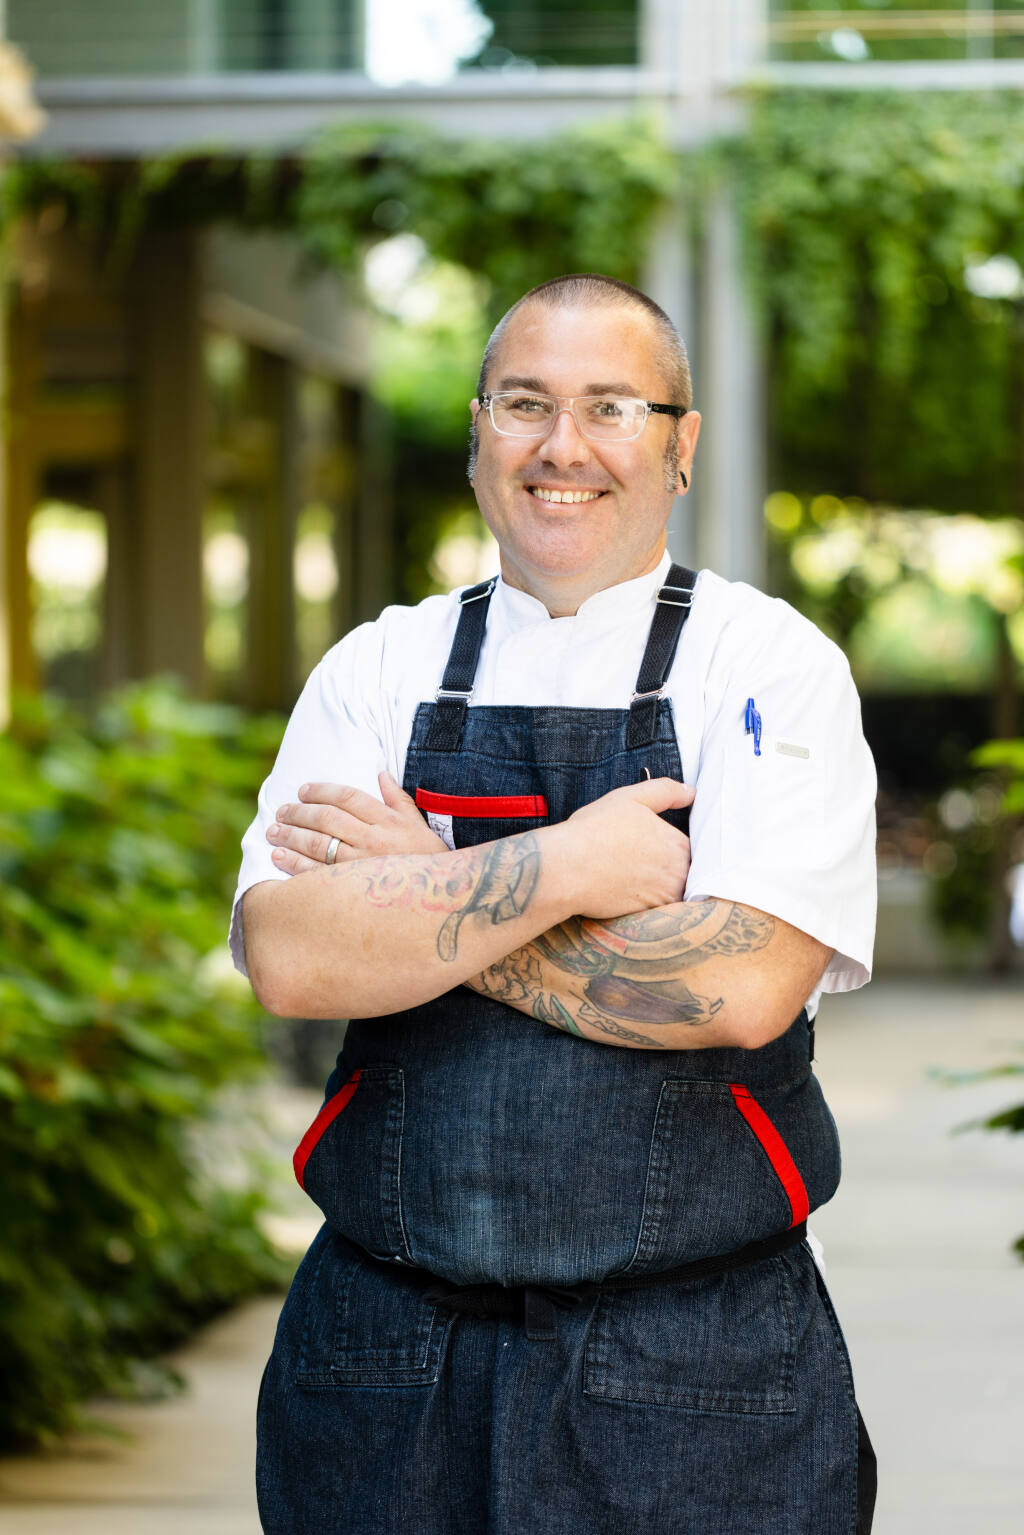 Shane McAnelly is the new executive chef of Dry Creek Kitchen. (Credit: Paige Green)